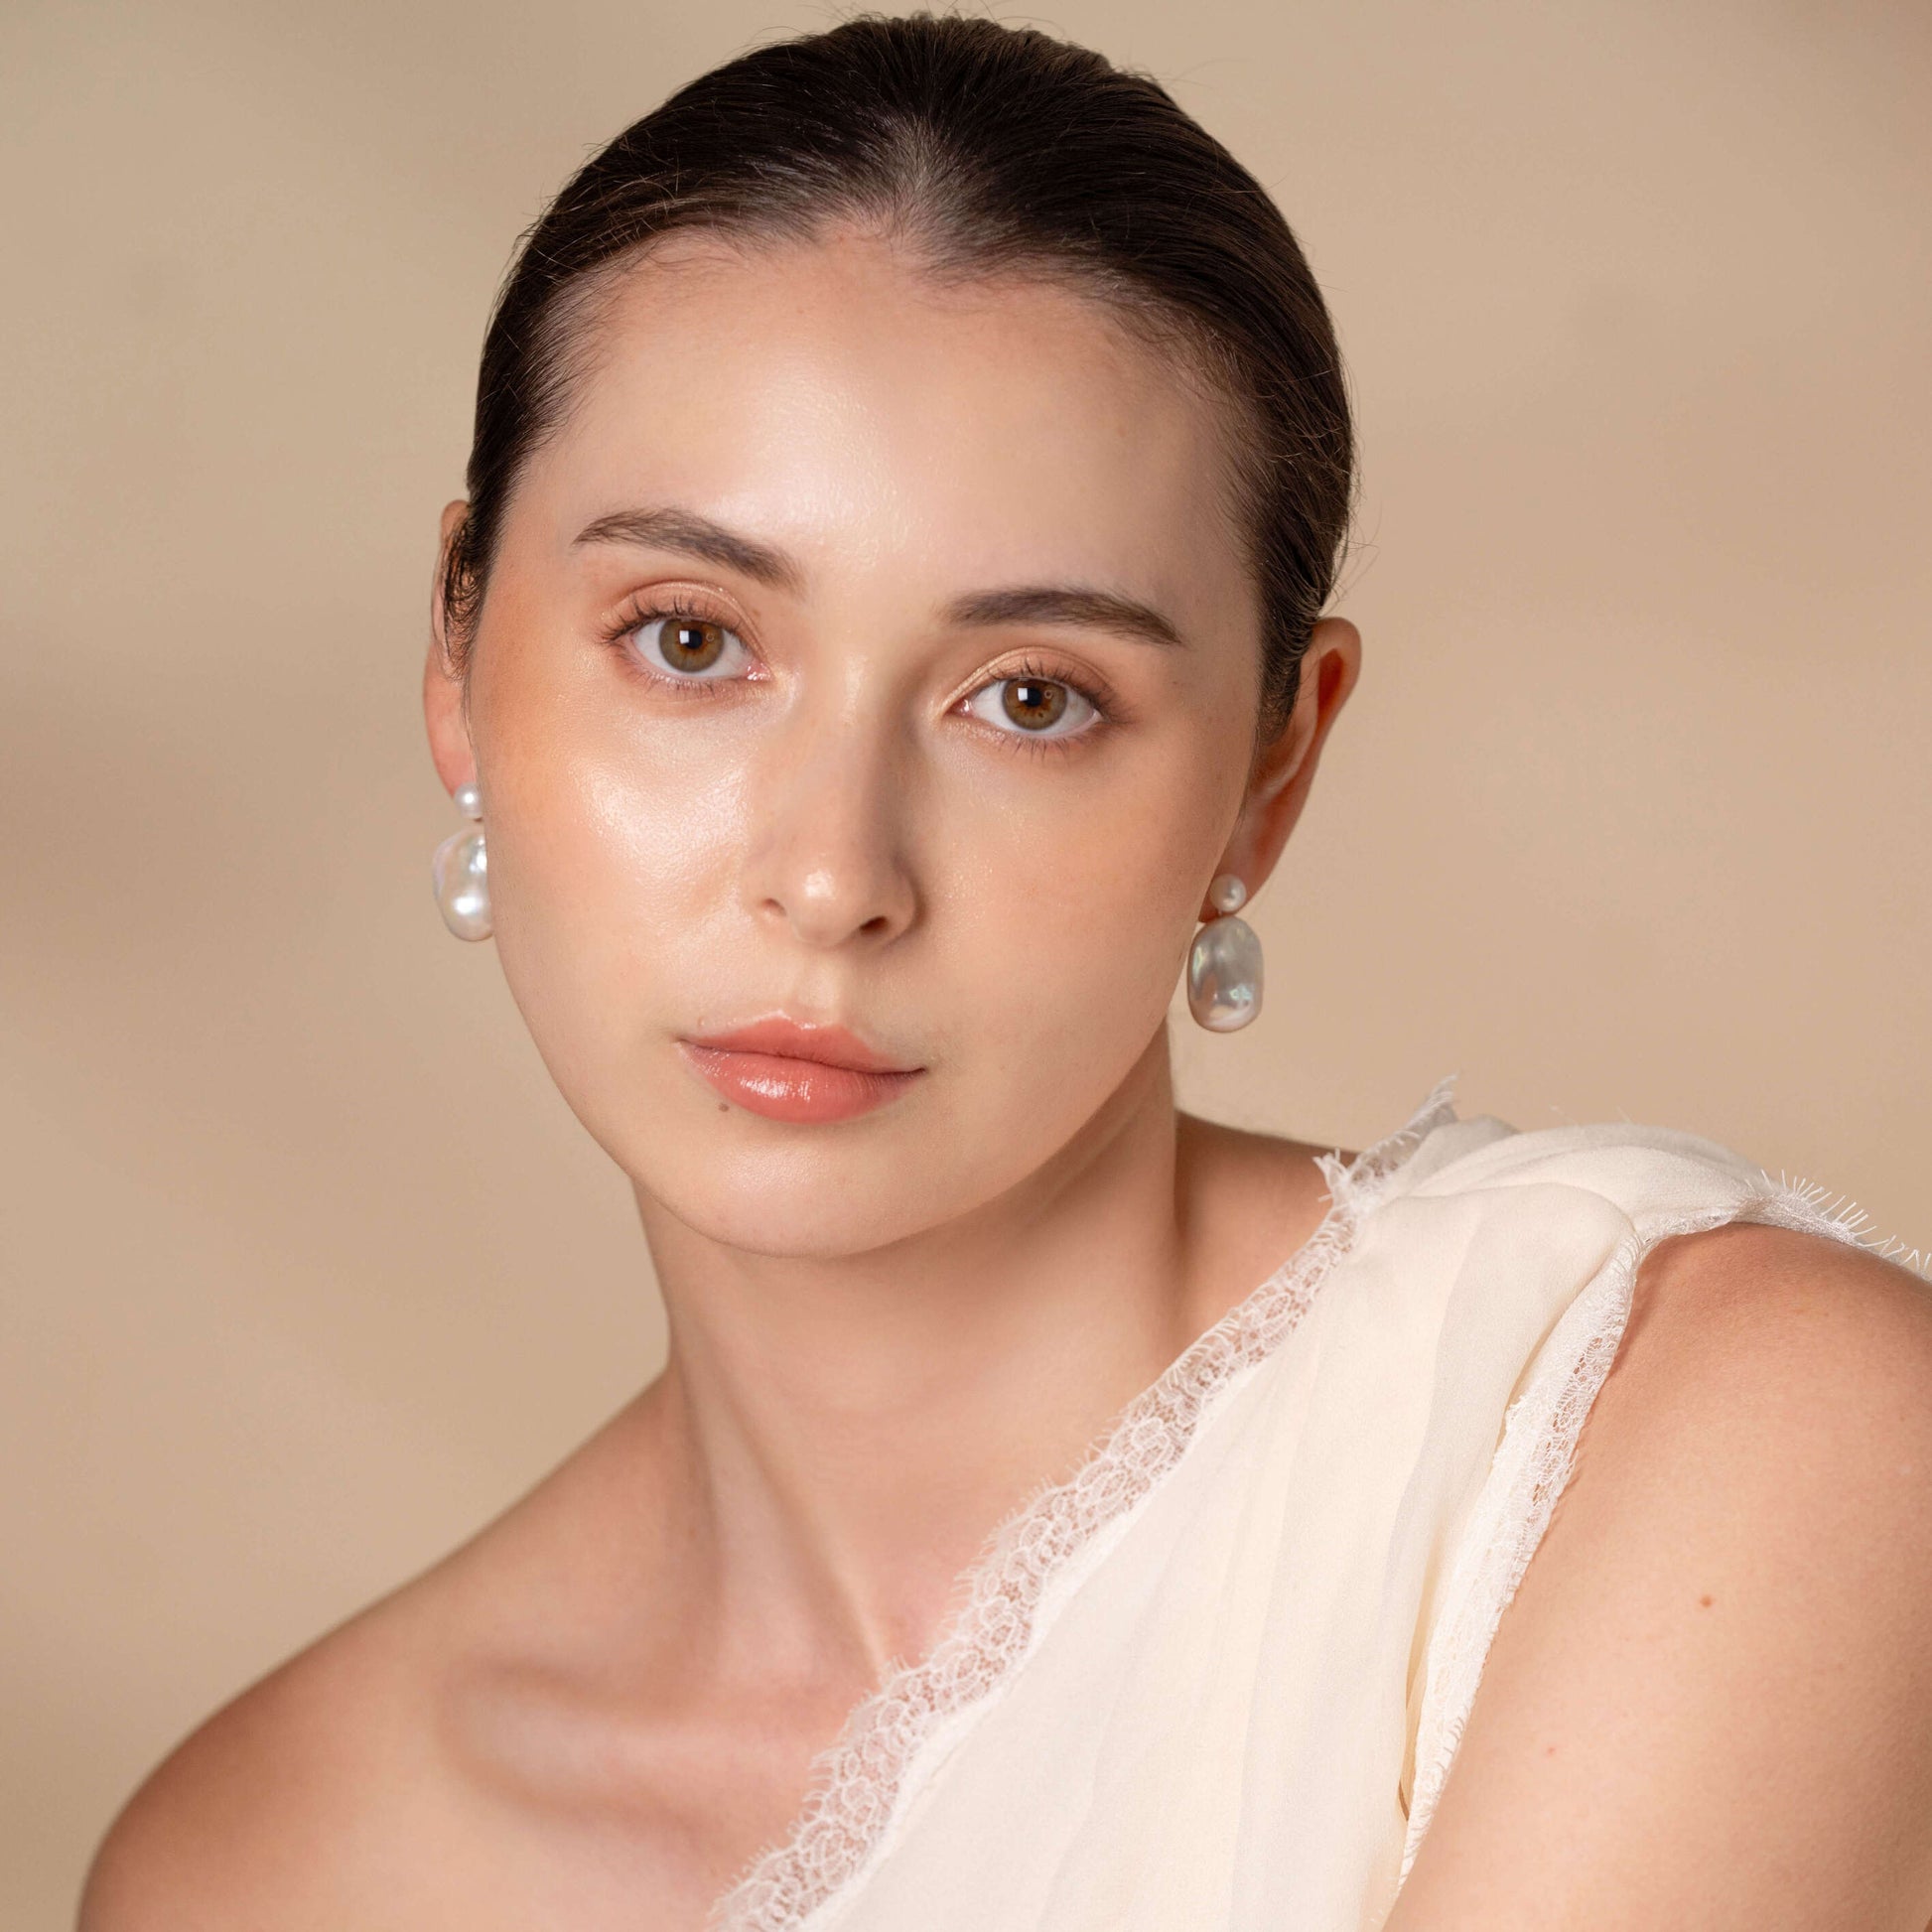 Stylish woman wearing white dress and earrings, with a Baroque Pearl Charm Piercing.